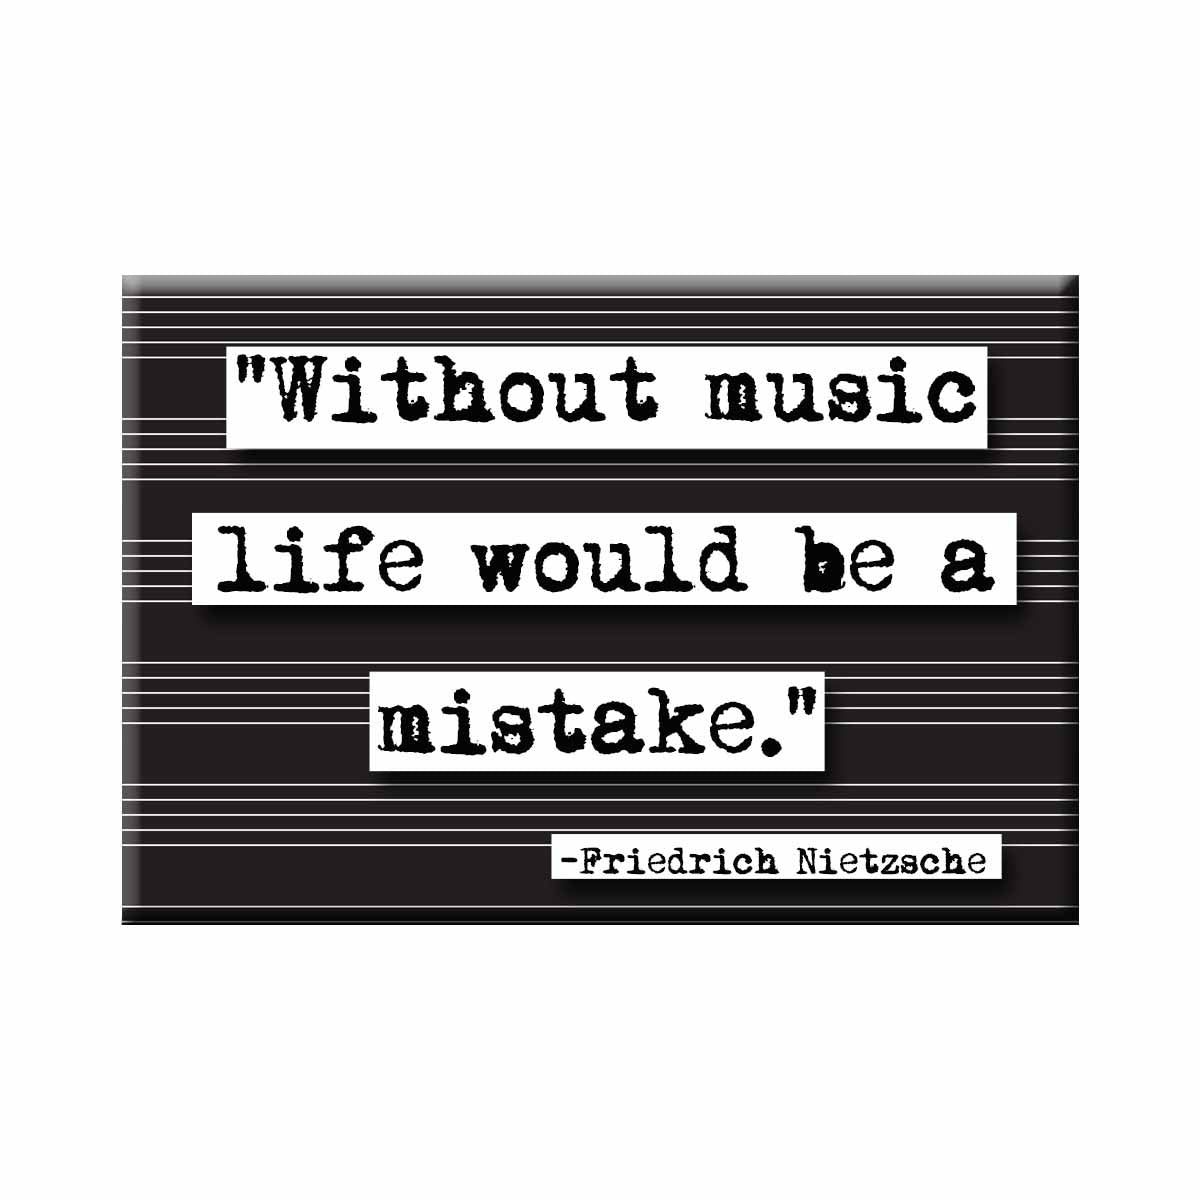 Nietzsche Life Without Music Refrigerator Magnet (no.831)